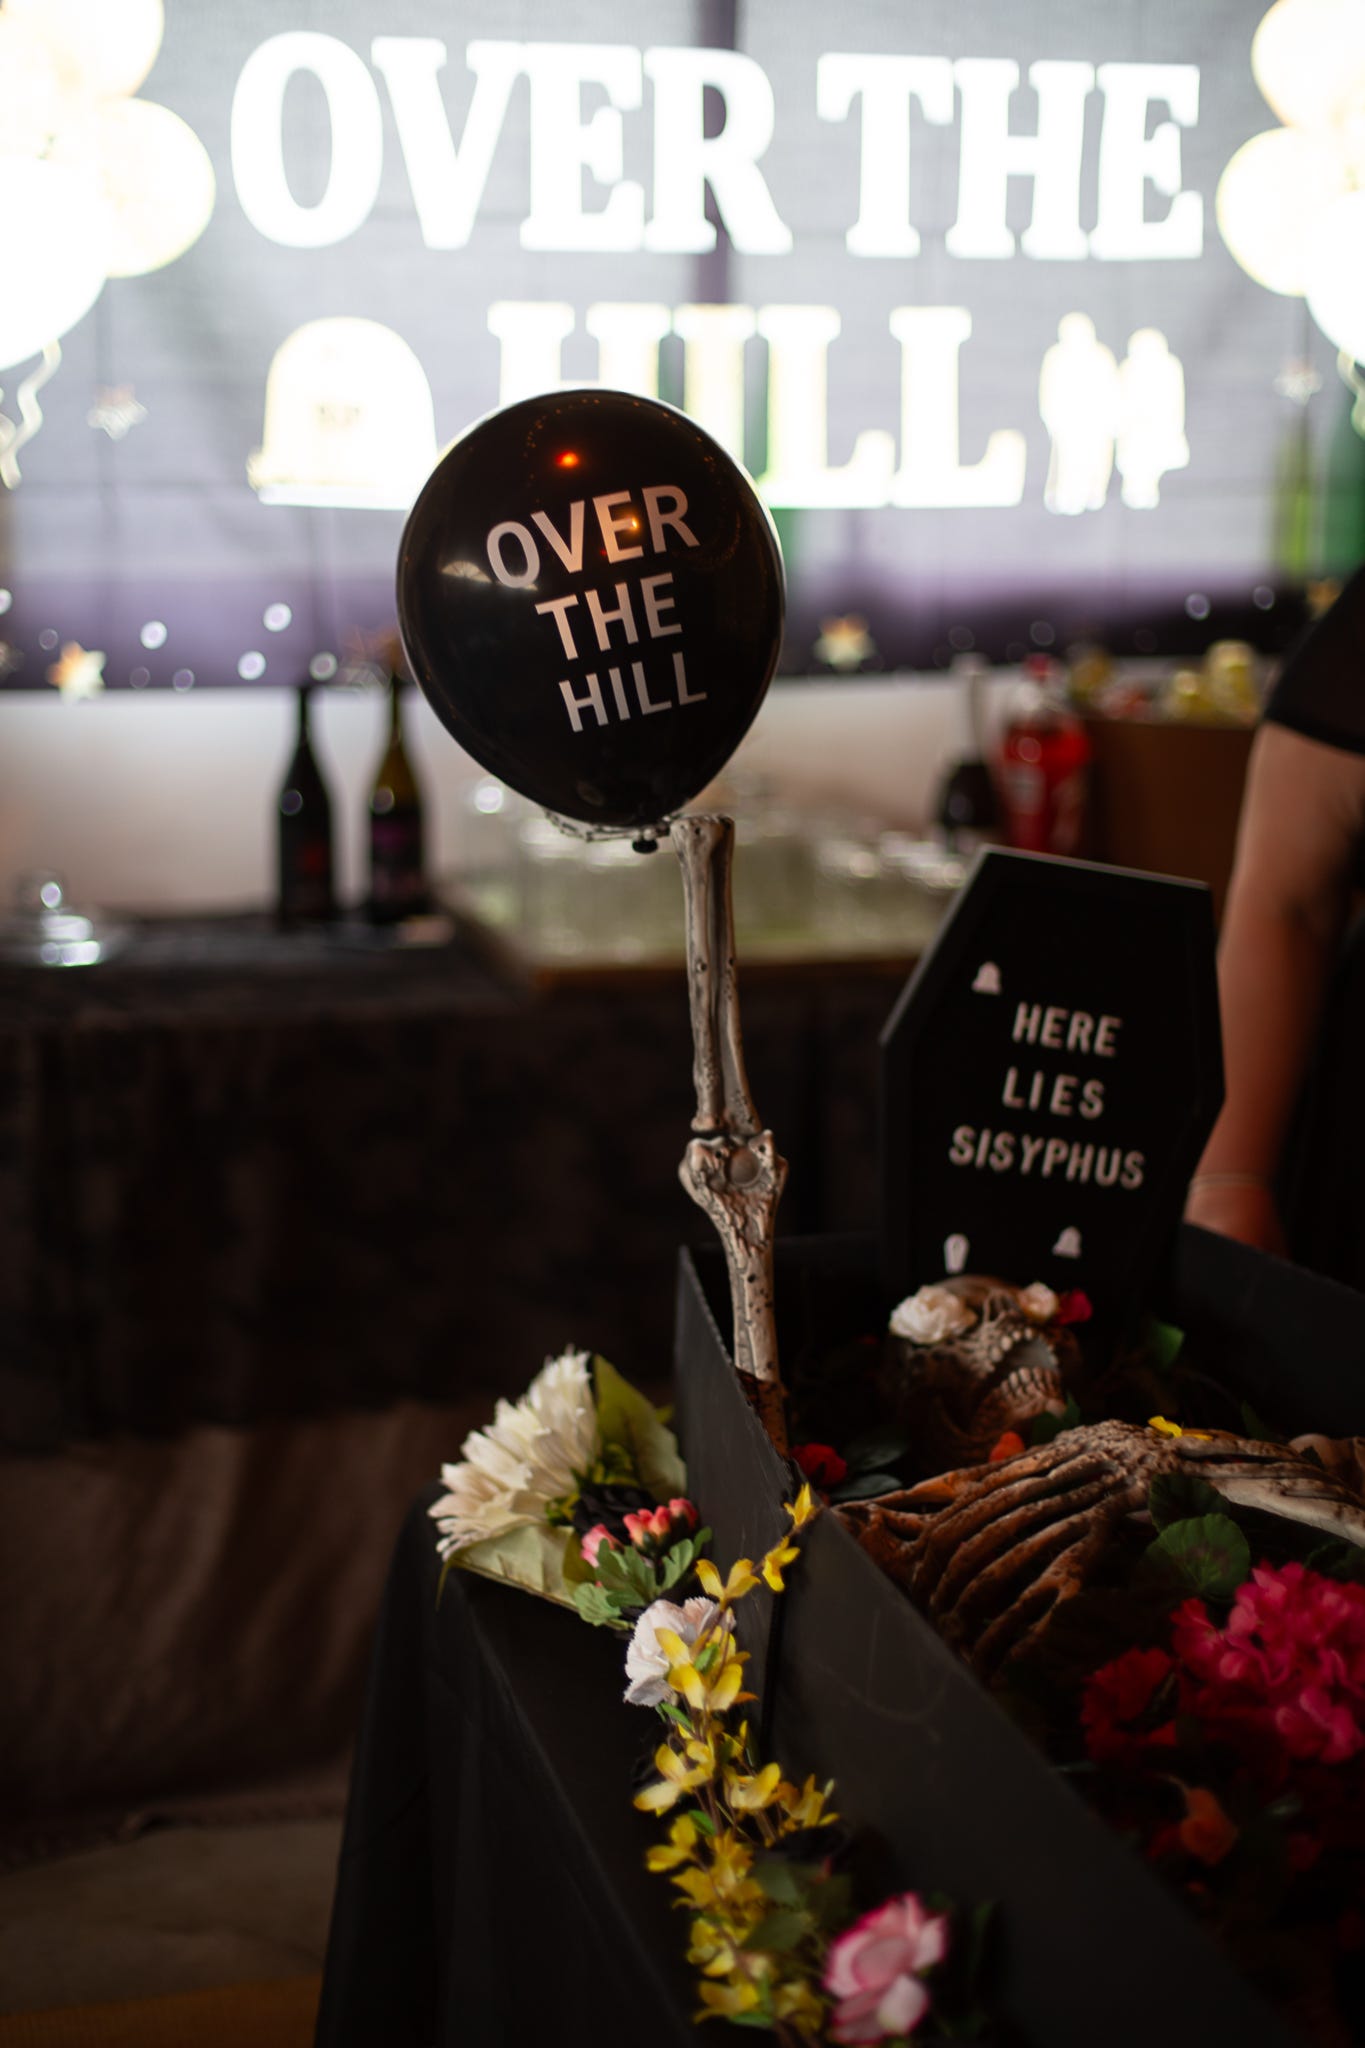 in the background is a banner that says over the hill. there is a fake coffin with a fake skeleton in the middle of the room, the fake skeleton hand is holding a black balloon with white letters that say over the hill